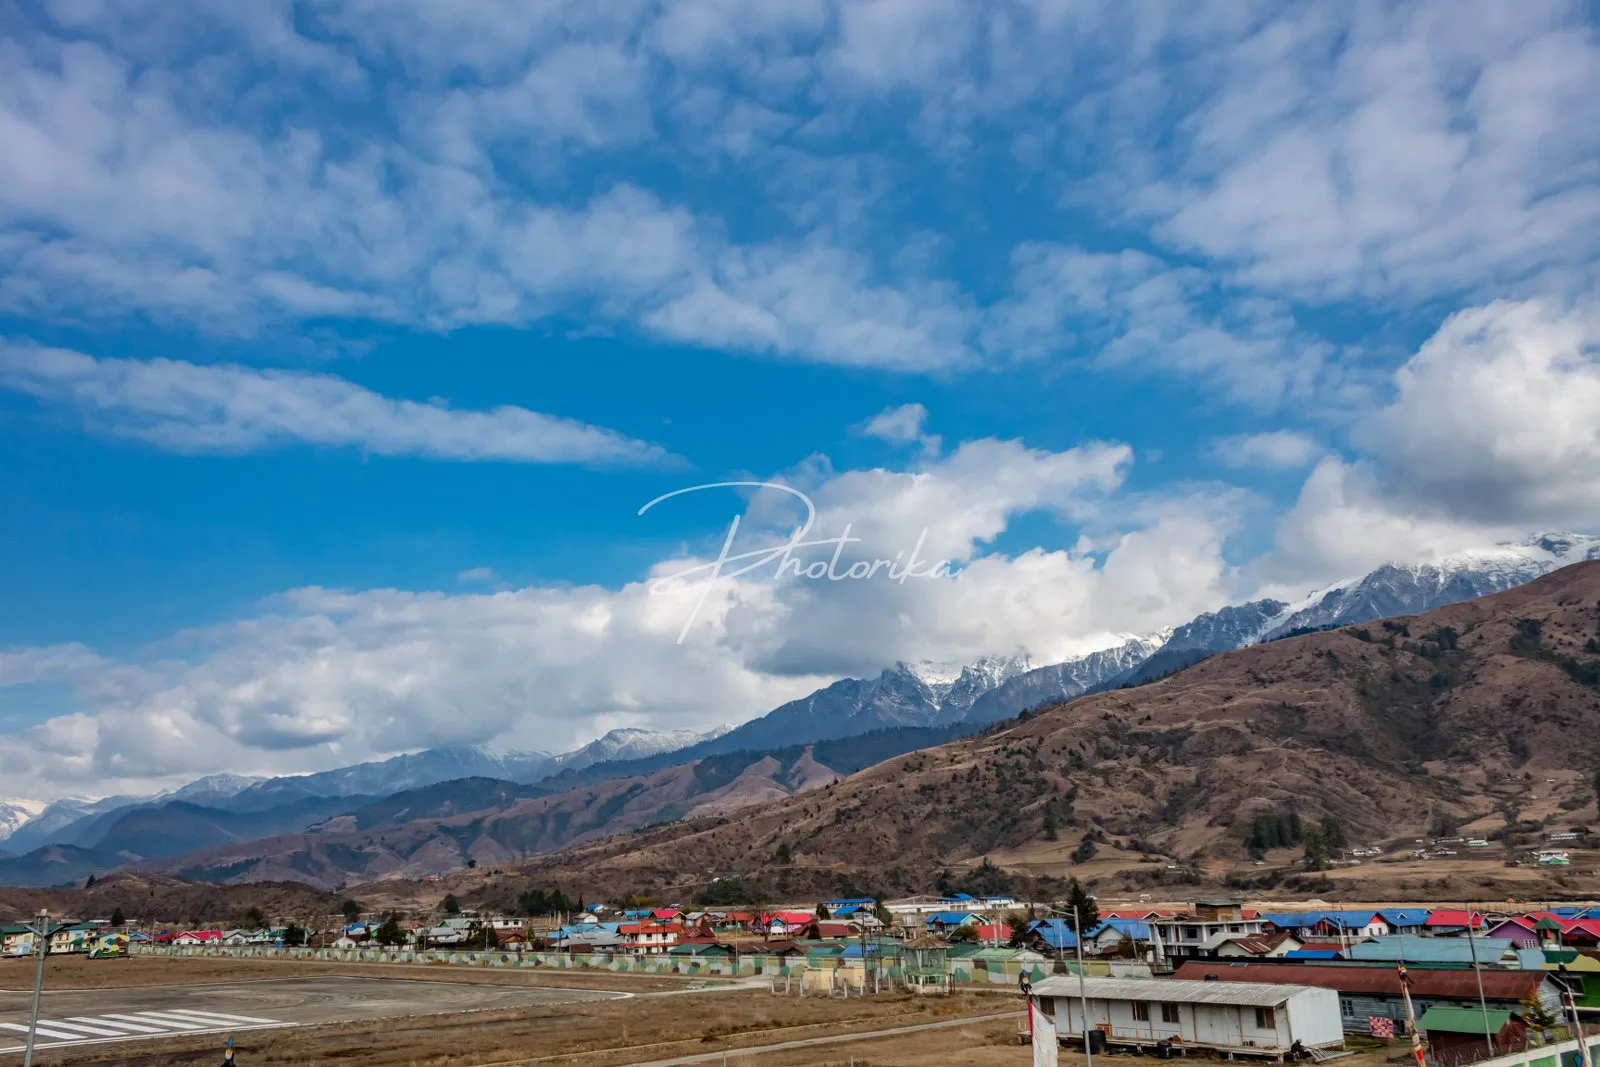 town-surrounded-by-mountains-blue-sky